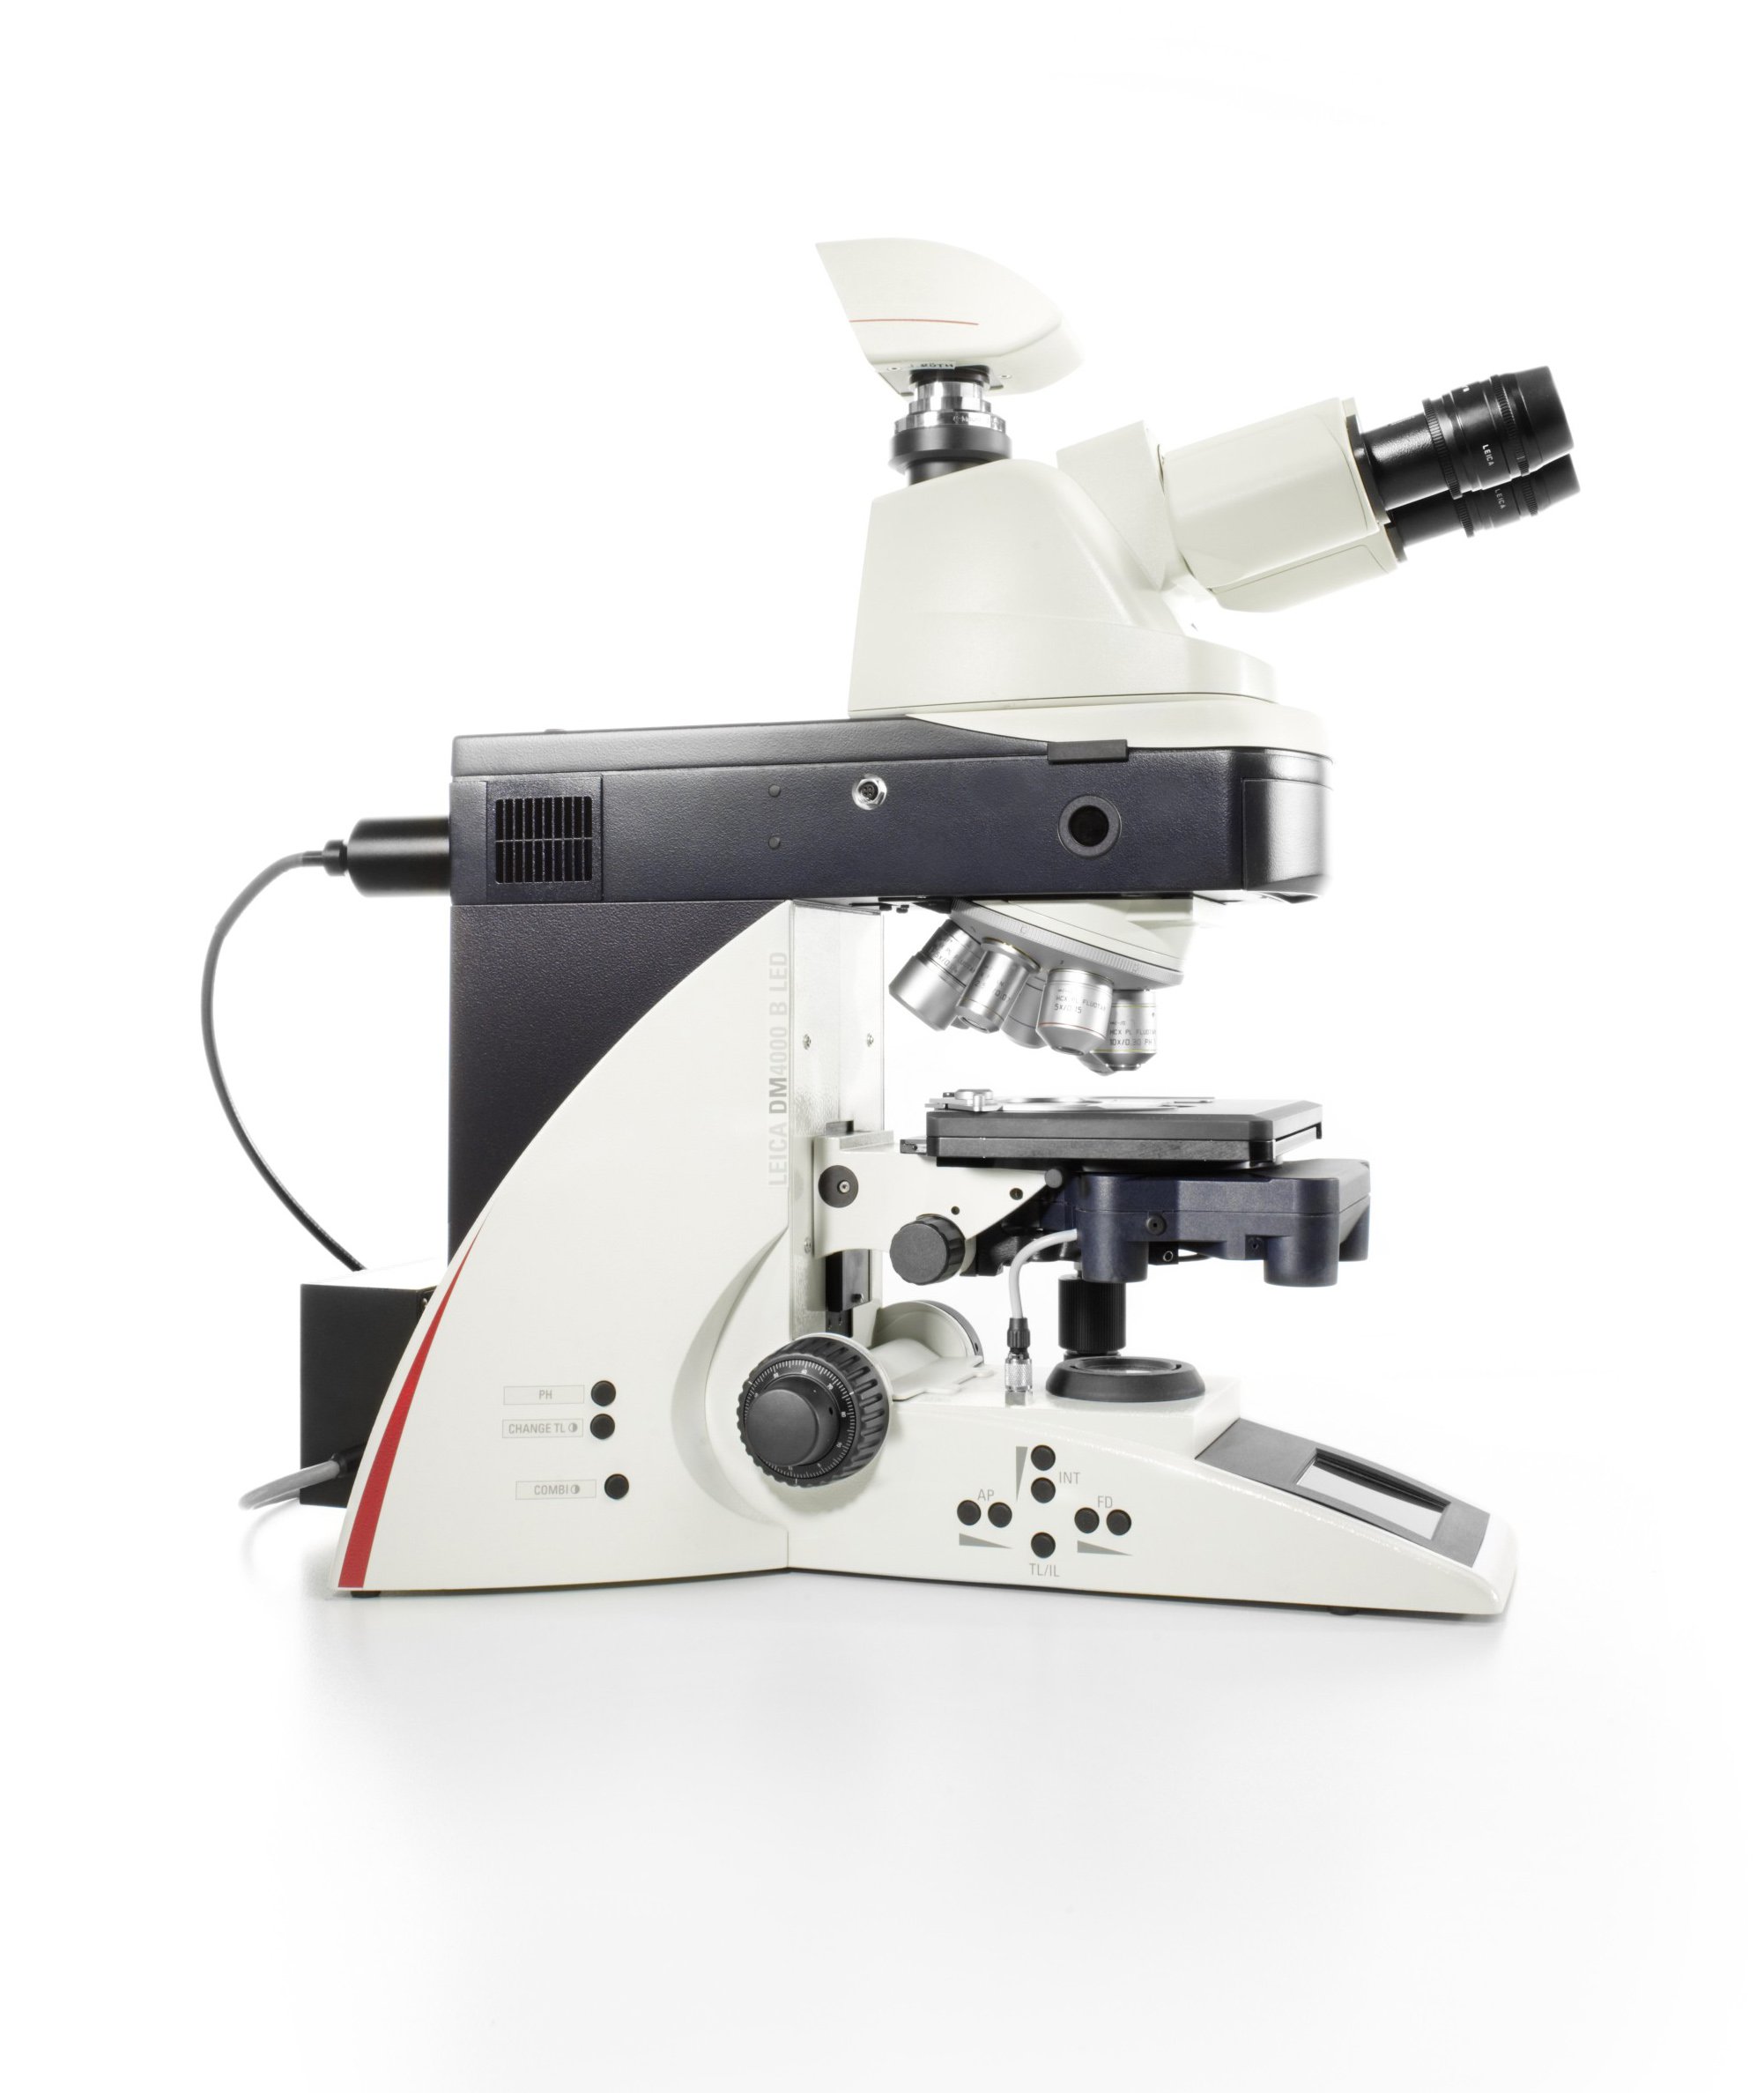 Automated Upright Microscope System with LED Illumination for Life Sciences